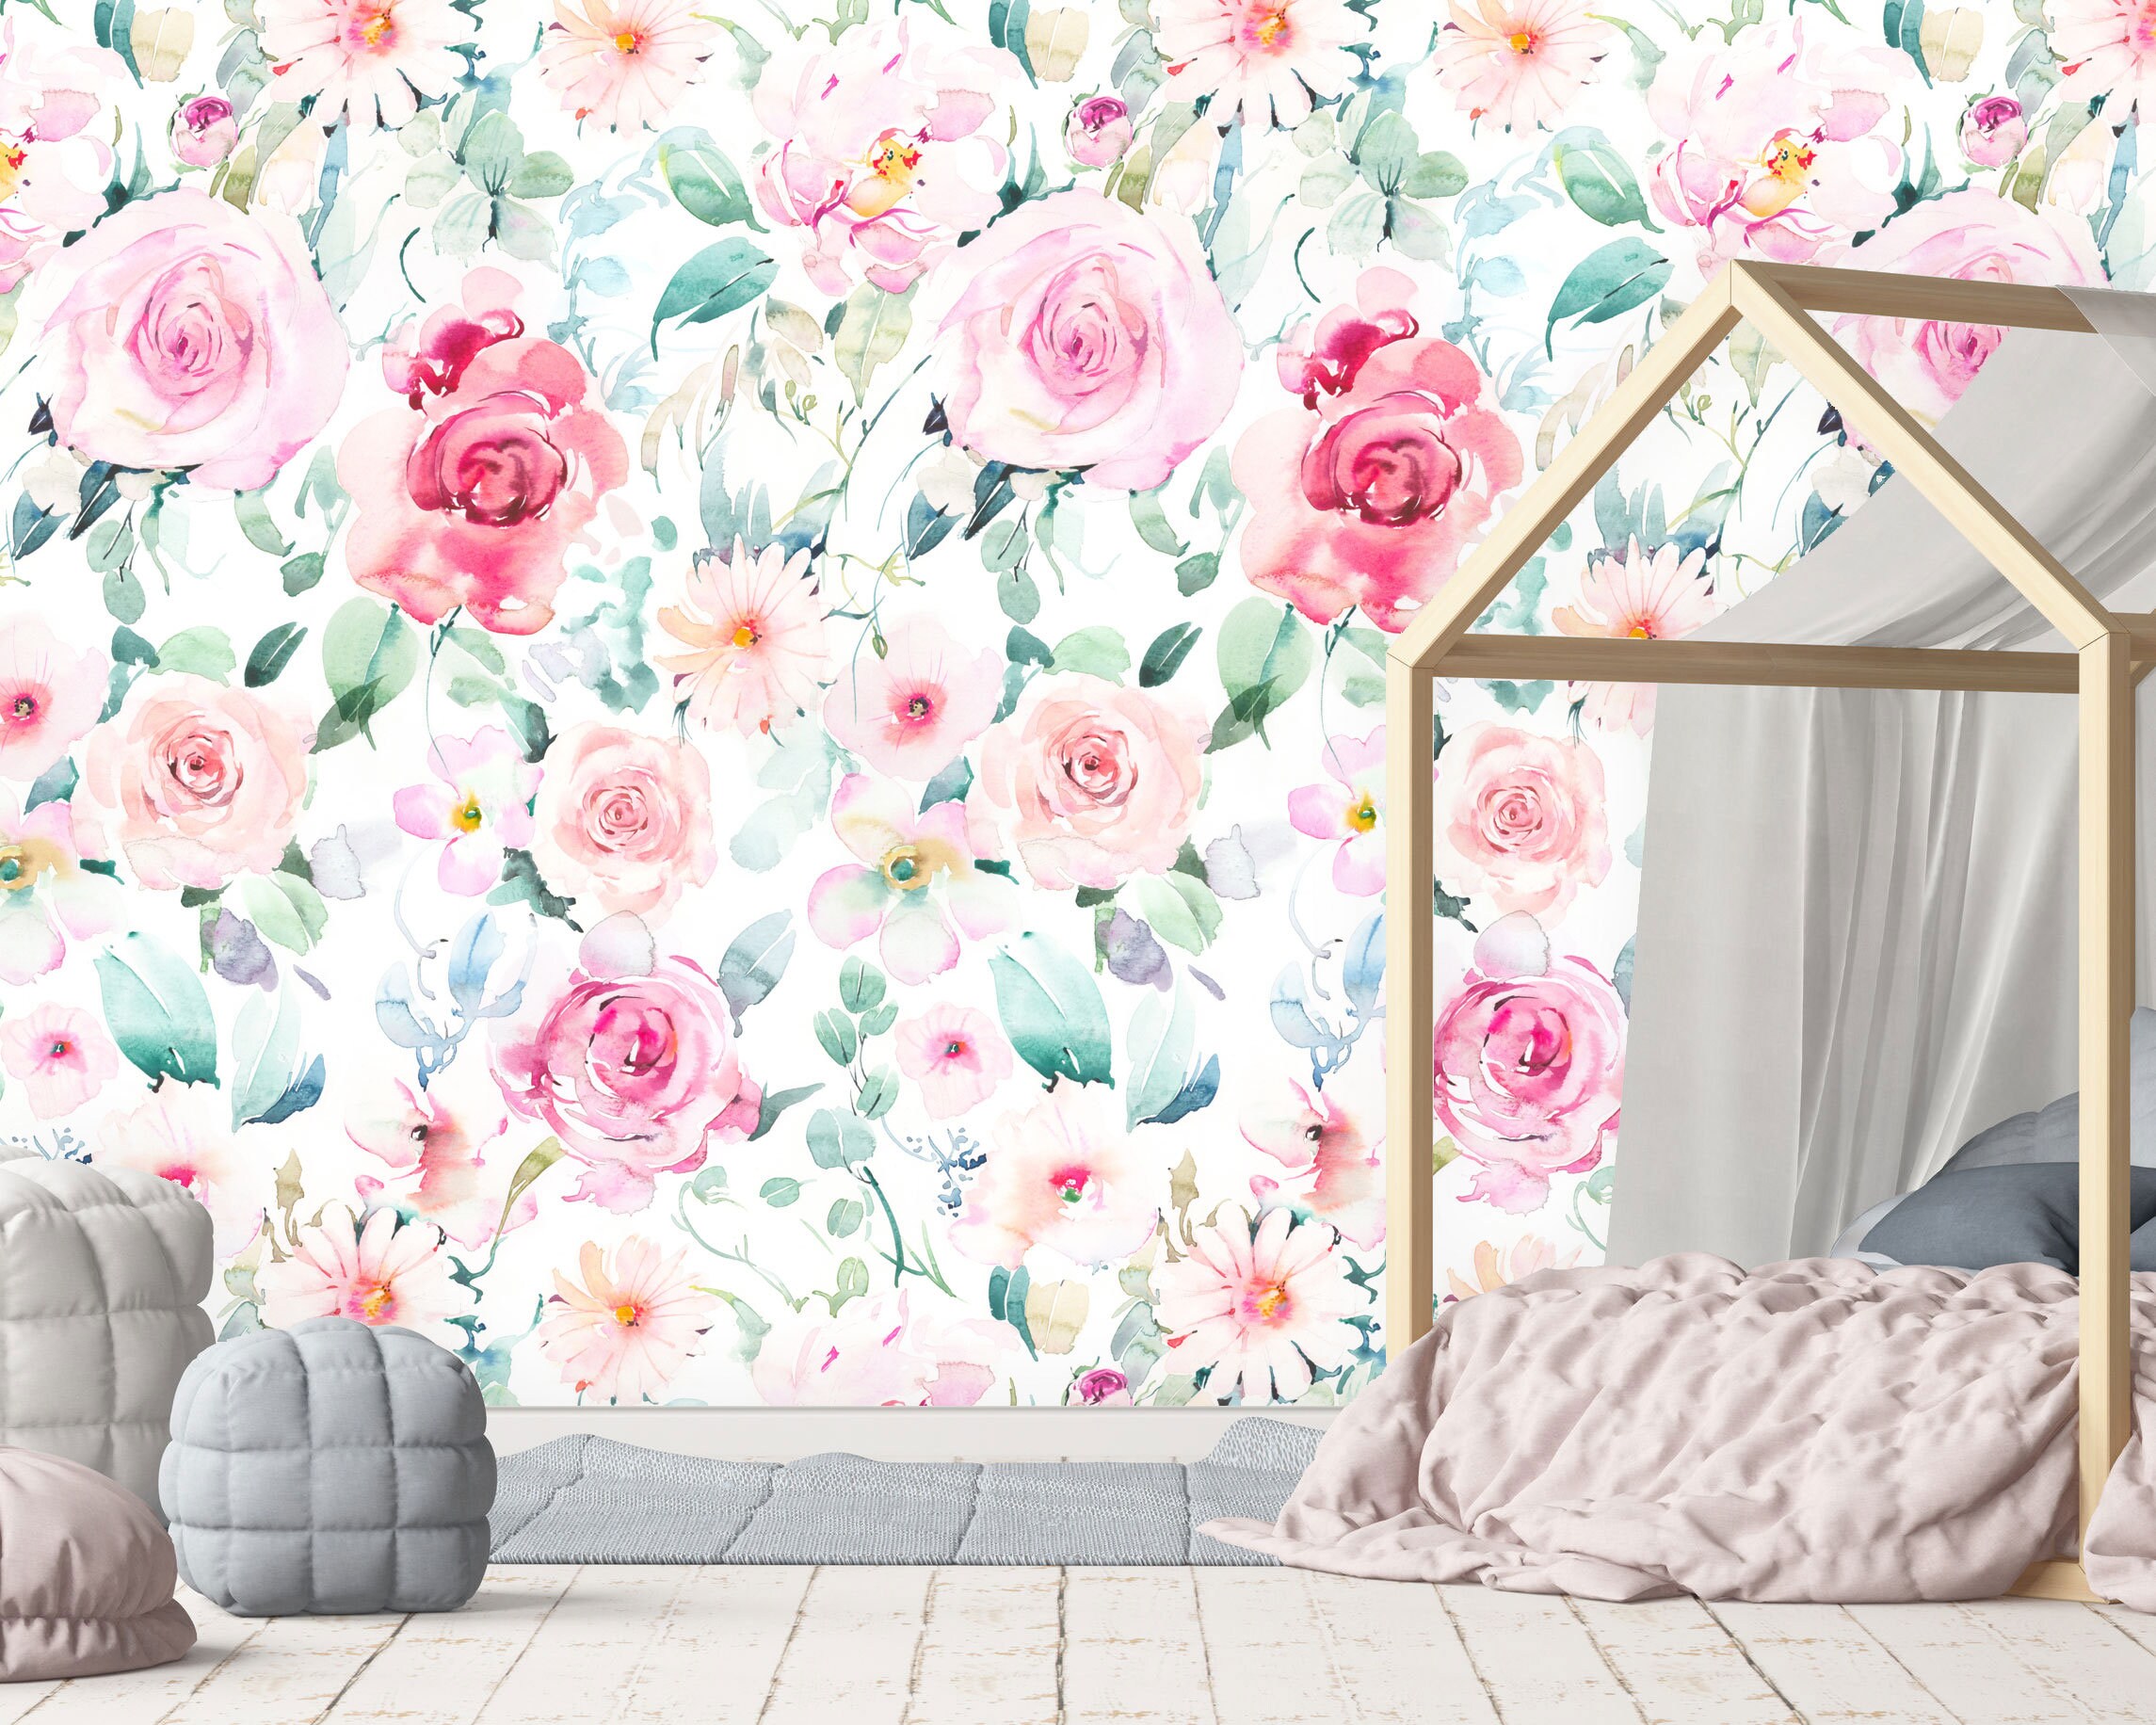 Alice's Garden Wall Mural, Watercolor Floral Wallpaper, Peonies, Roses and  Daisies Wallpaper, Delicate Floral Wallpaper, Nursery Décor 